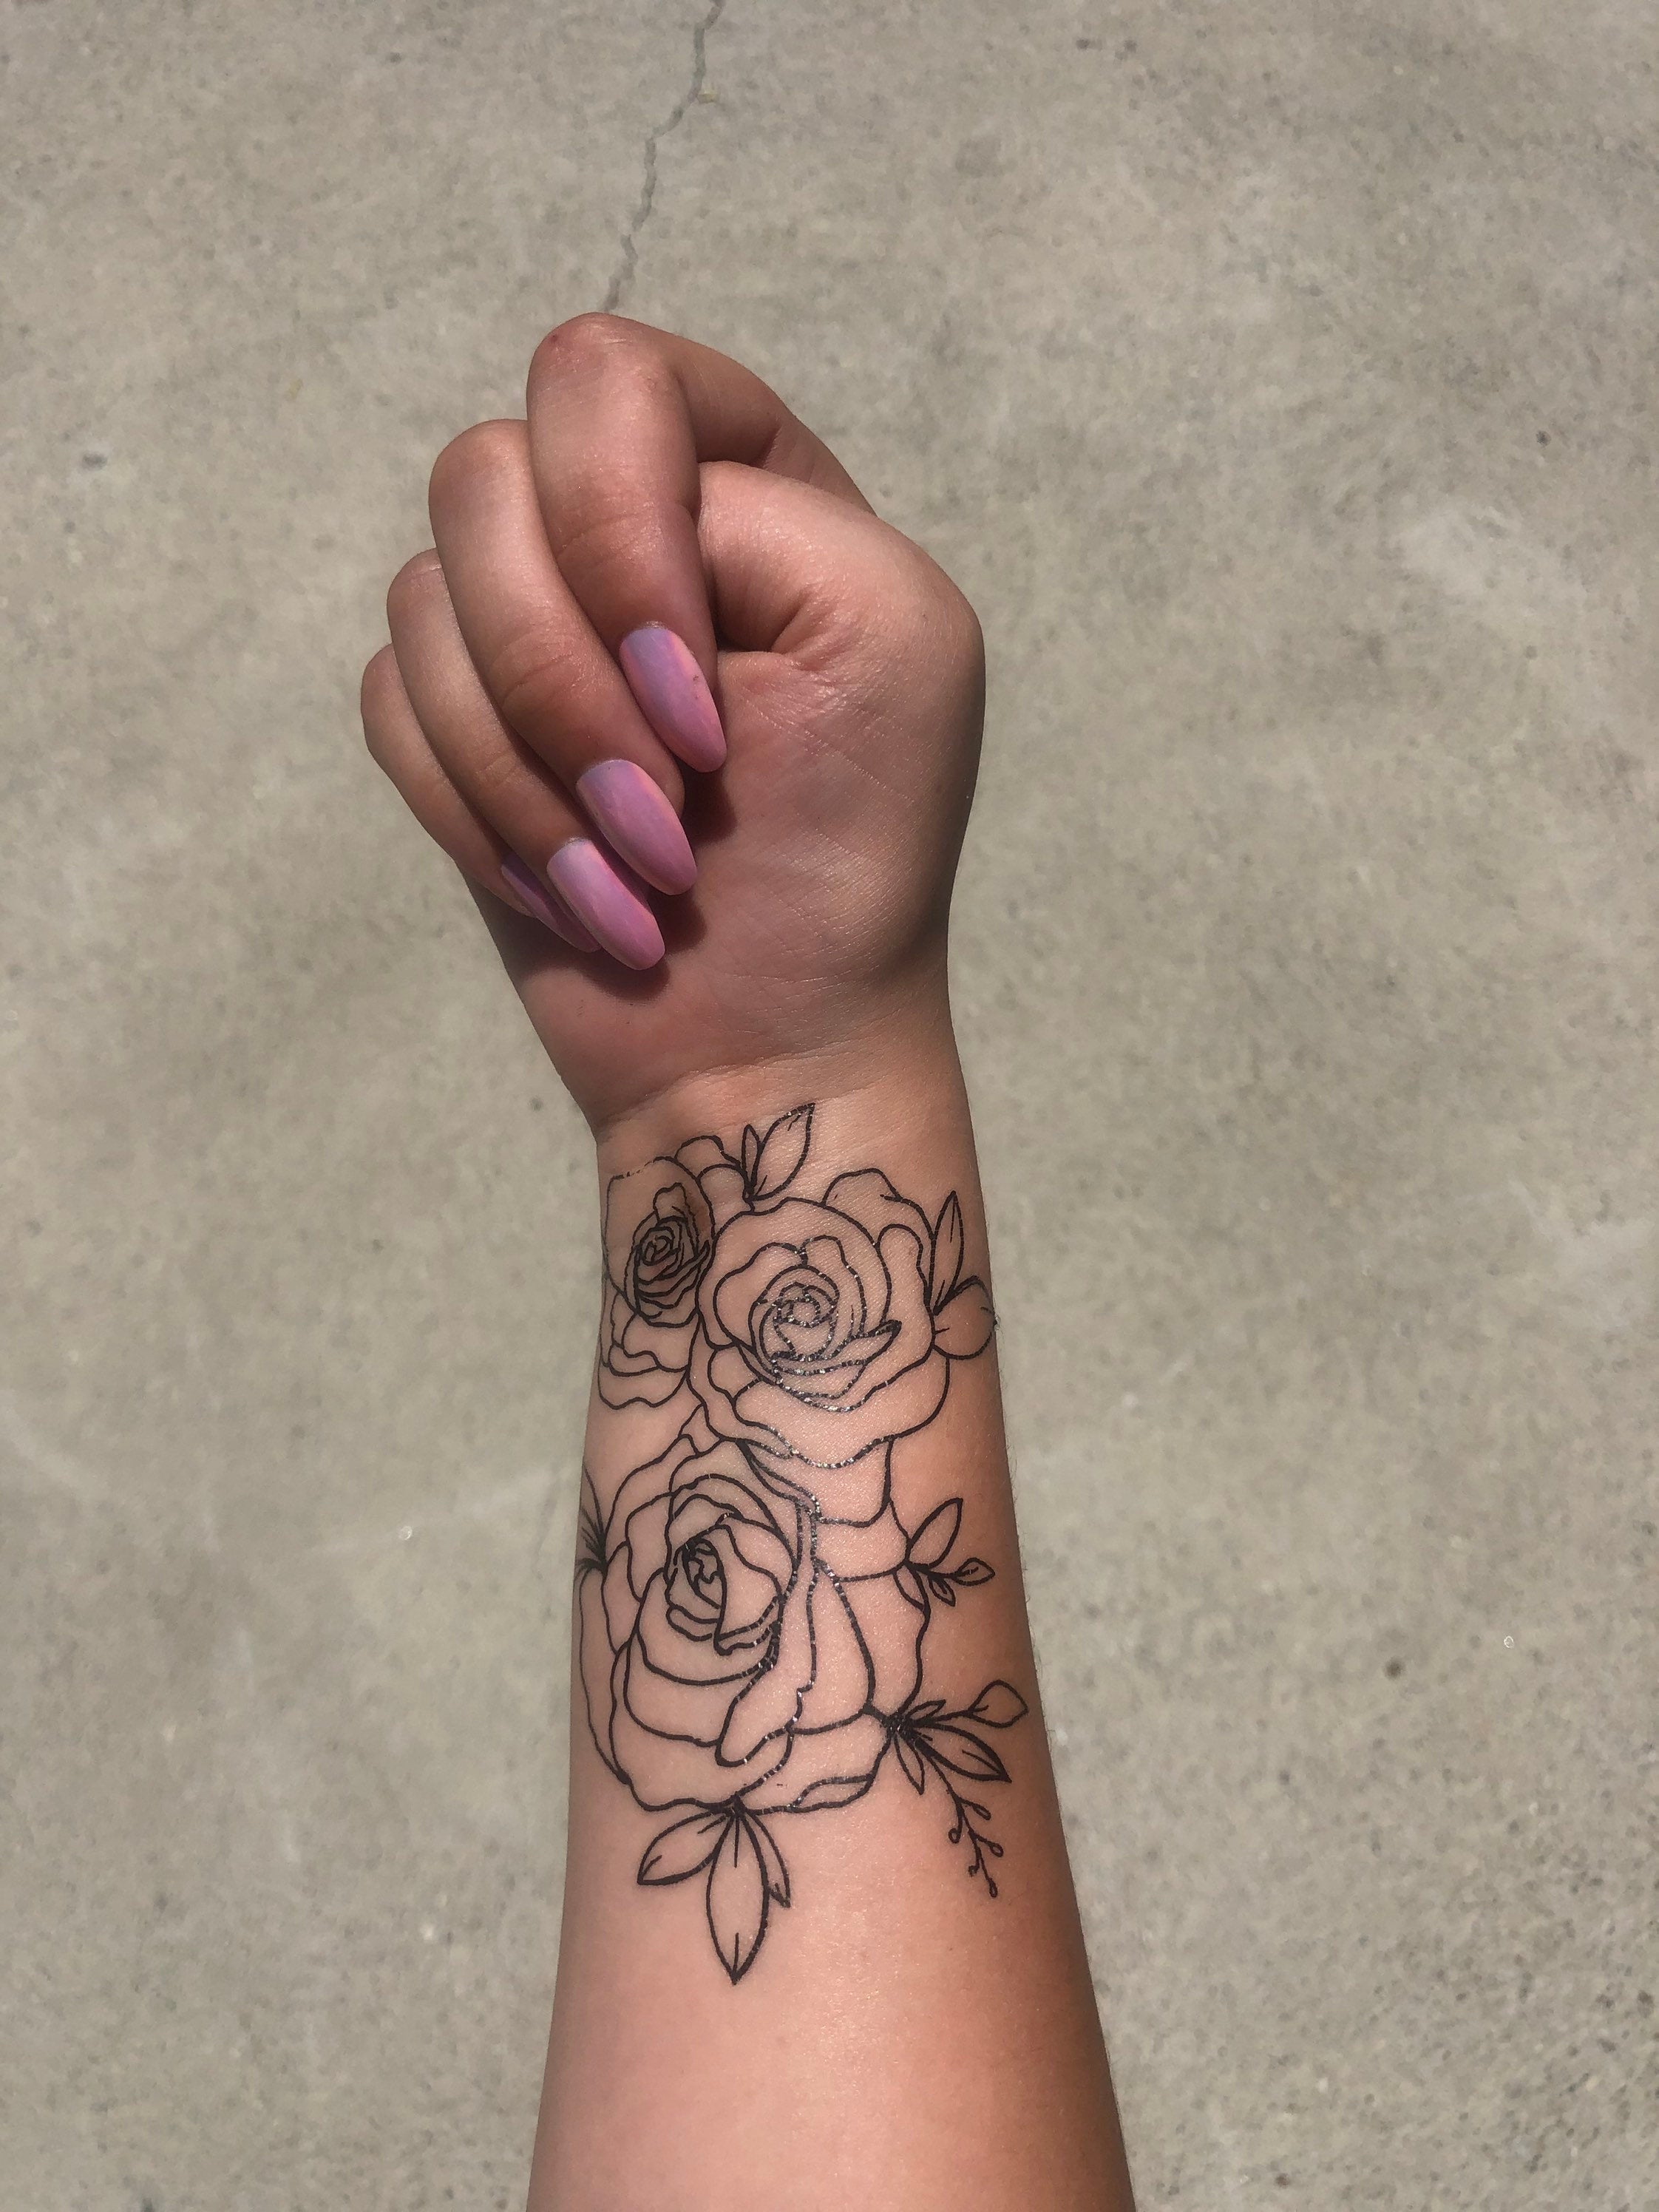 Best Rose Tattoo Ideas And Where To Place Them